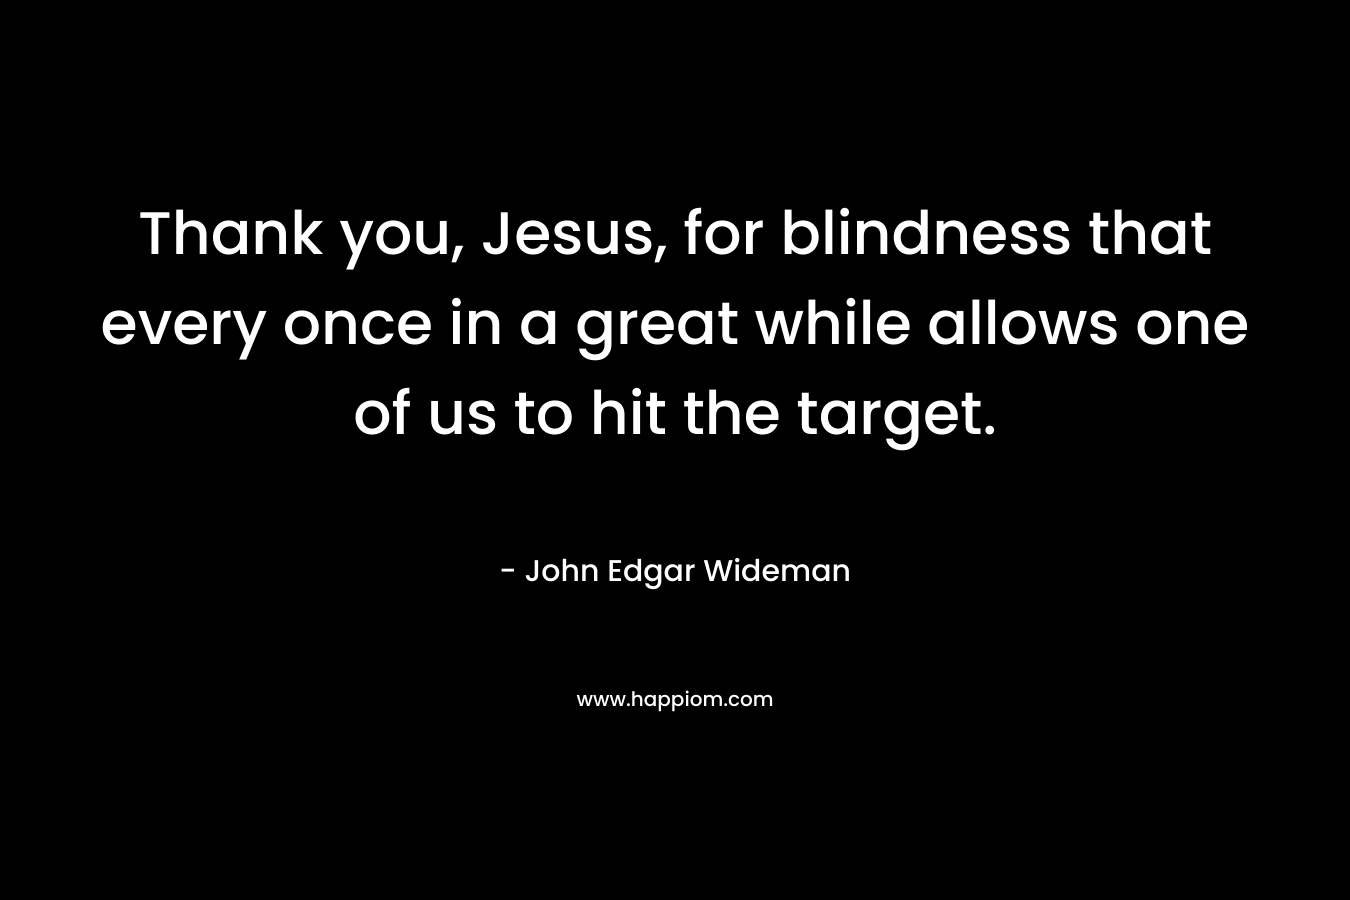 Thank you, Jesus, for blindness that every once in a great while allows one of us to hit the target. – John Edgar Wideman